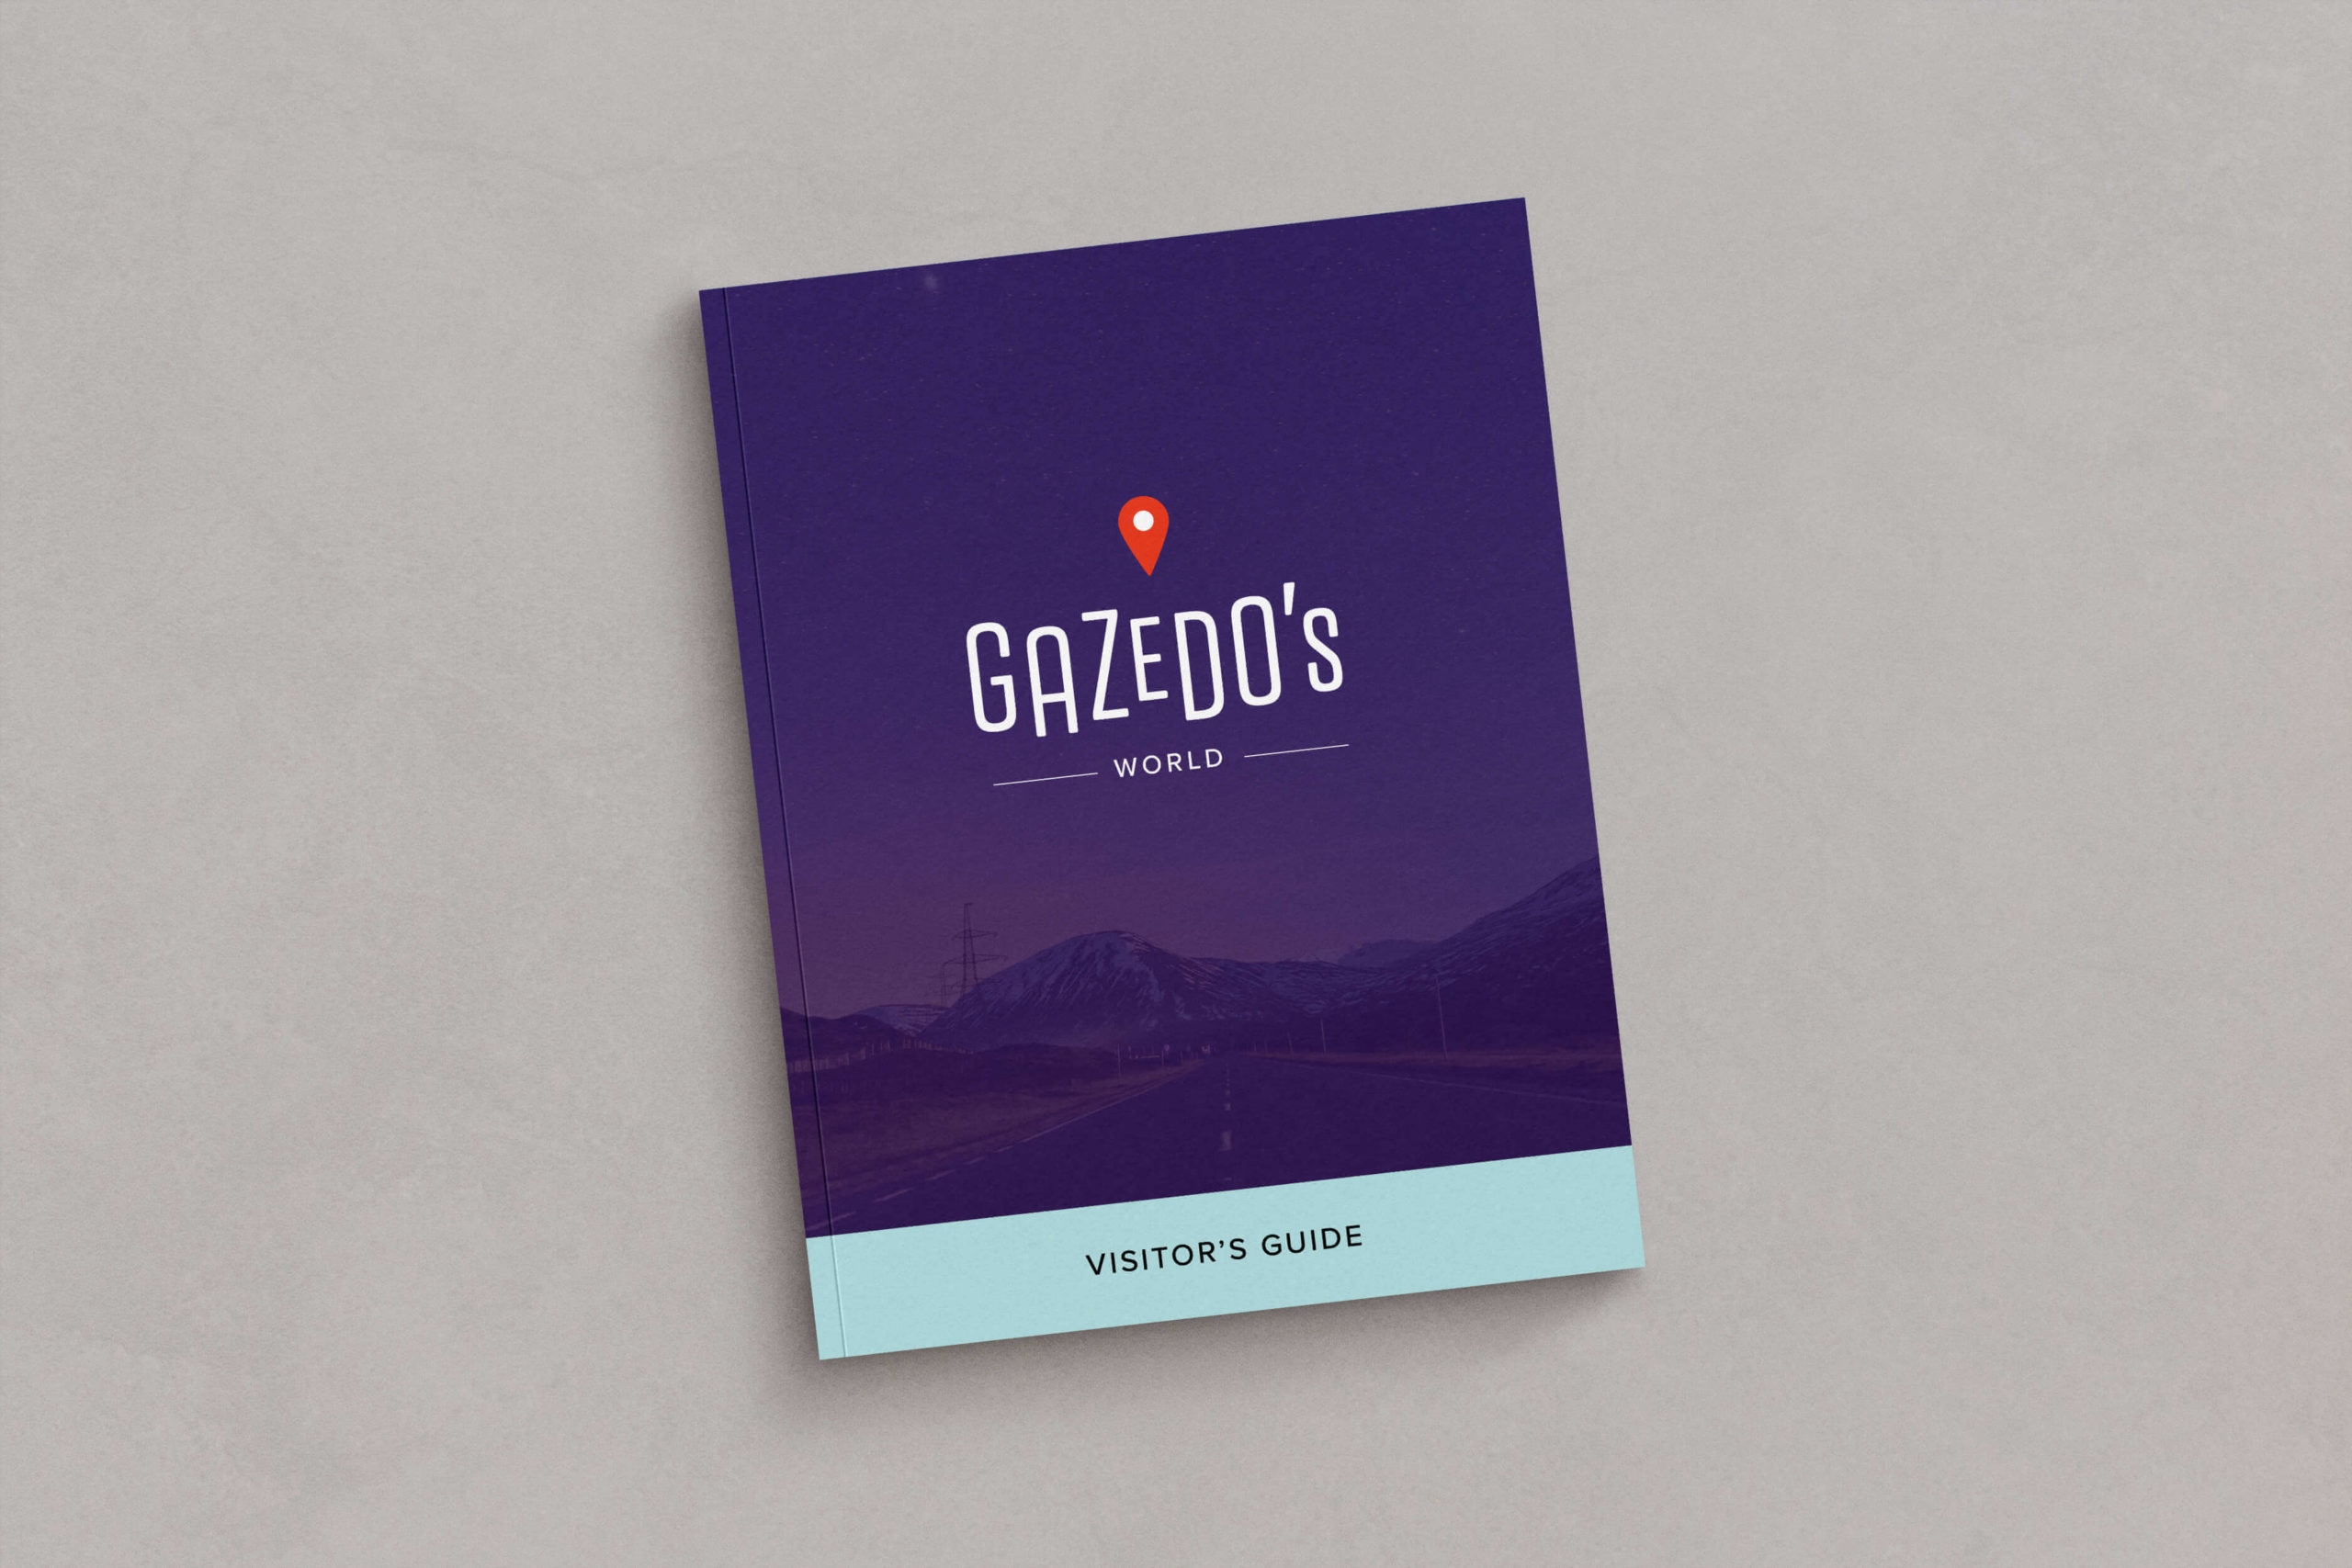 Branded Visitor's Guide collateral for Fort Worth personal driver and concierge, Gazedo's World. Branding and collateral design by London Sharay Design.